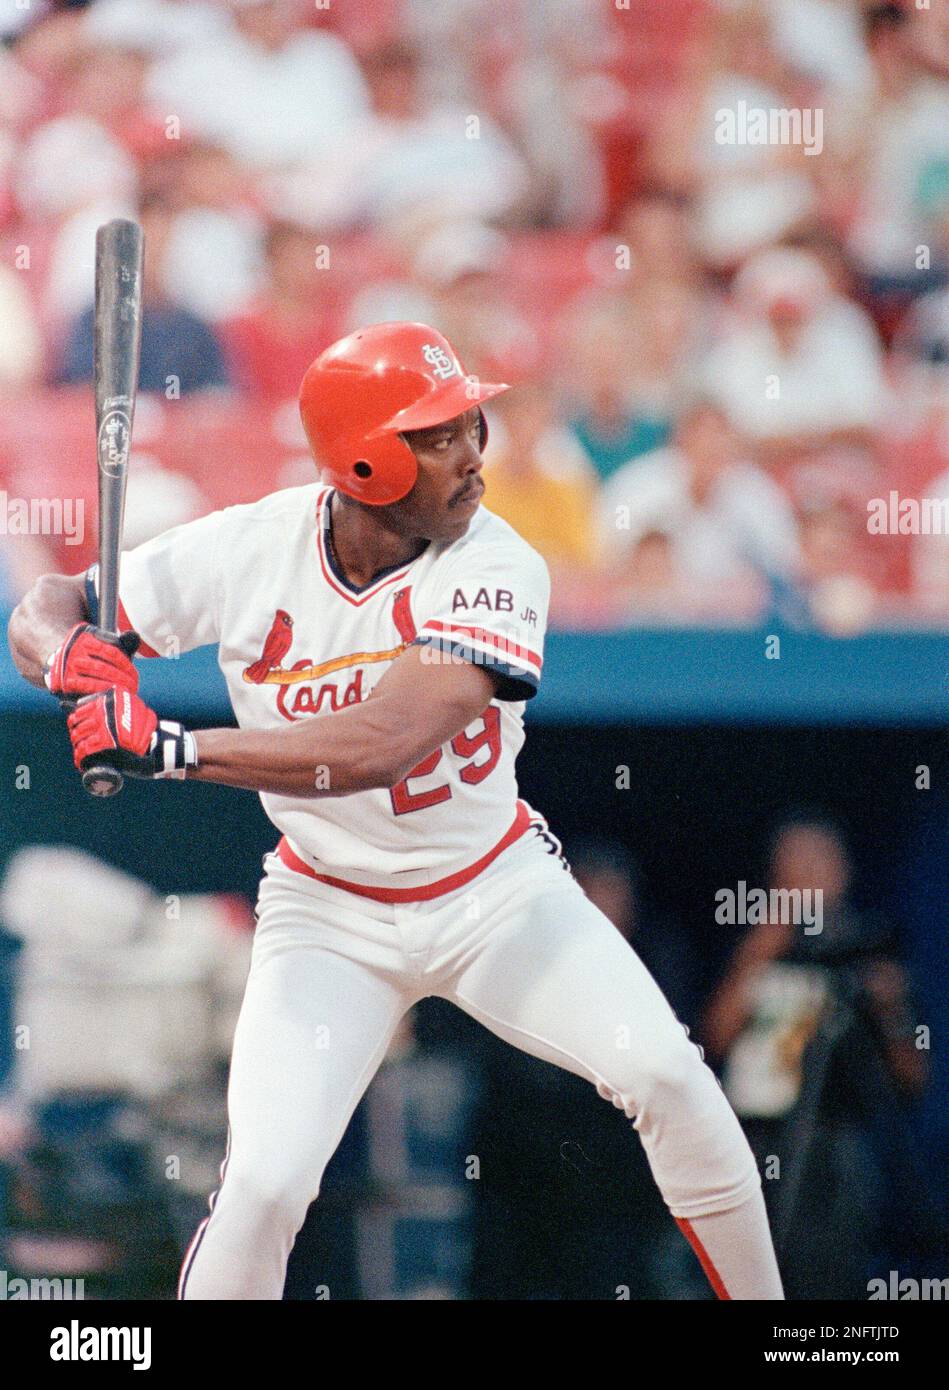 Vince Coleman of the St. Louis Cardinals writhes in pain after a